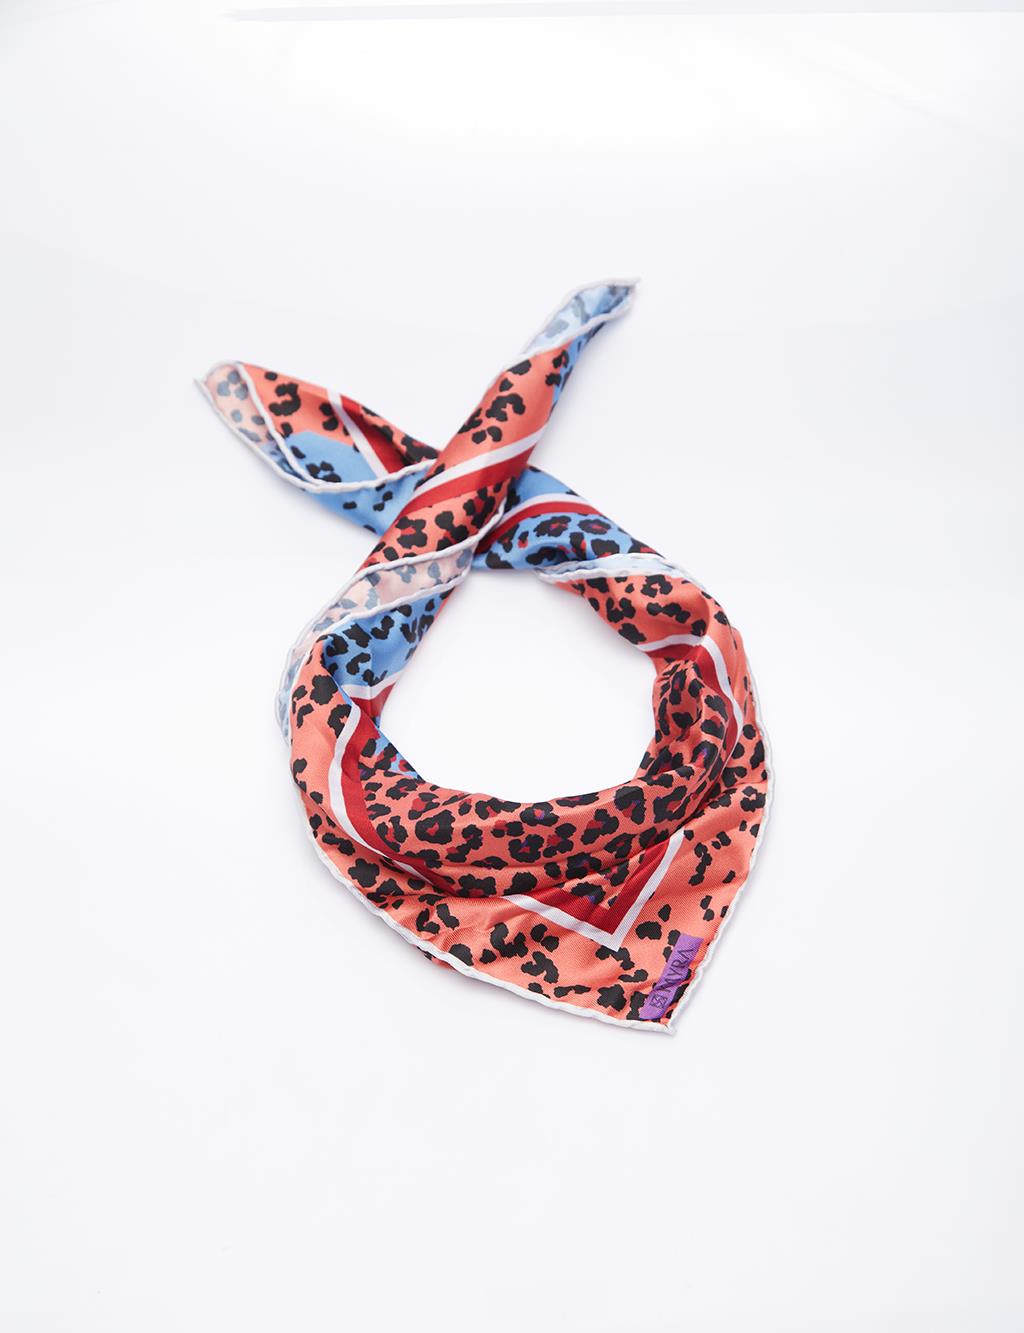 Leopard Patterned Scarf Blue-Red